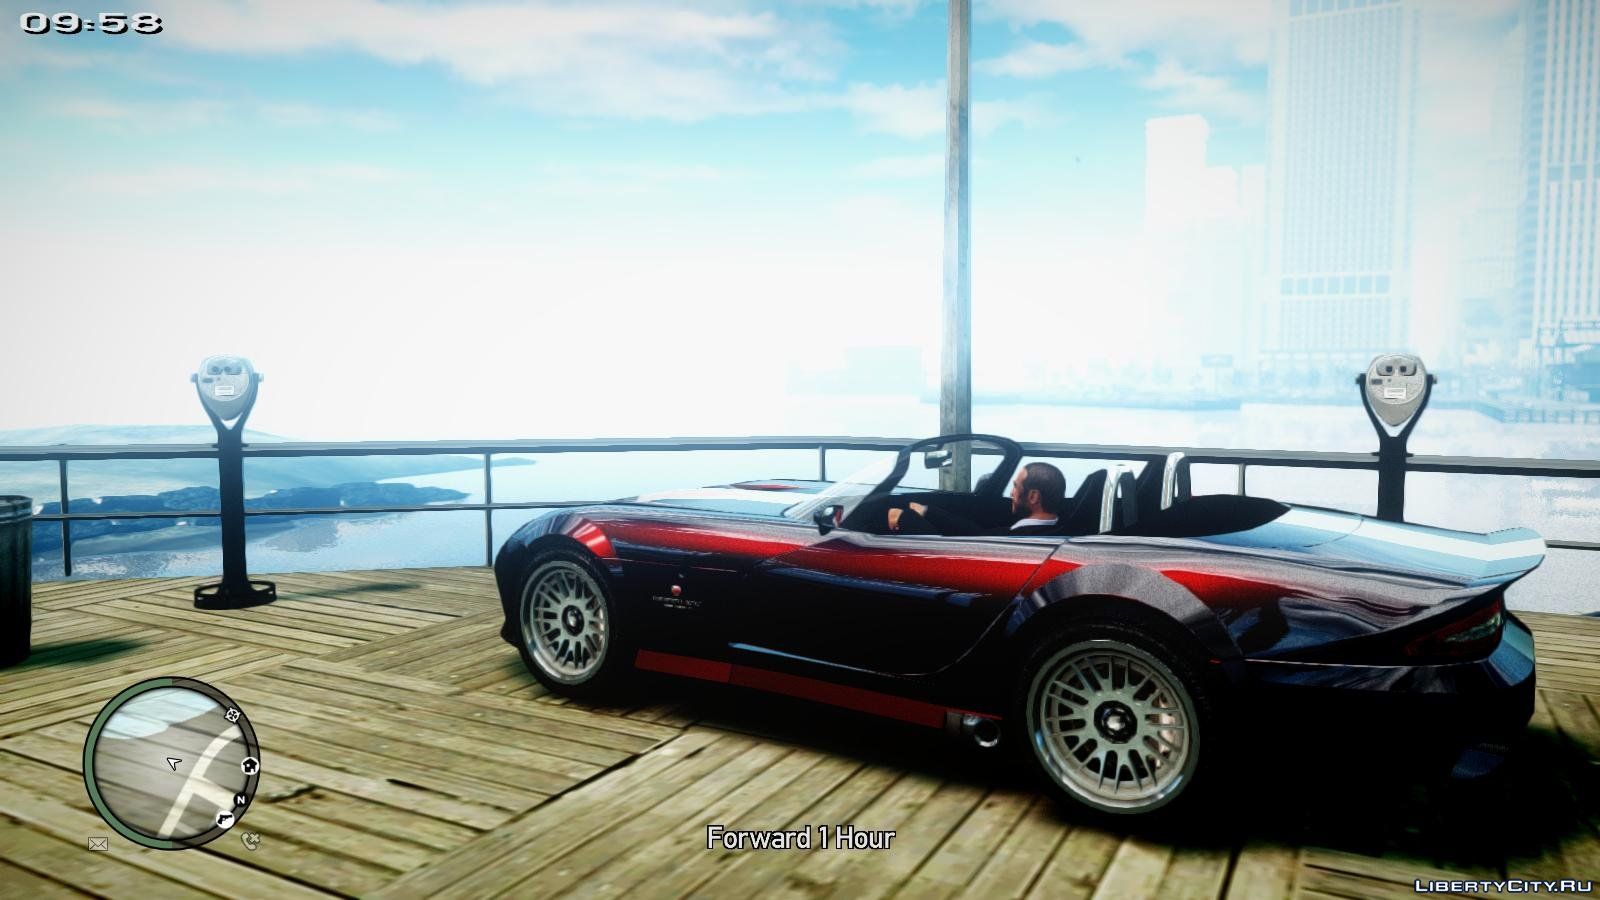 rfoodxmodz on X: Just ported graphics mod to PS4 GTA V 😎 I will release  it asap #PS4 #GTAV  / X